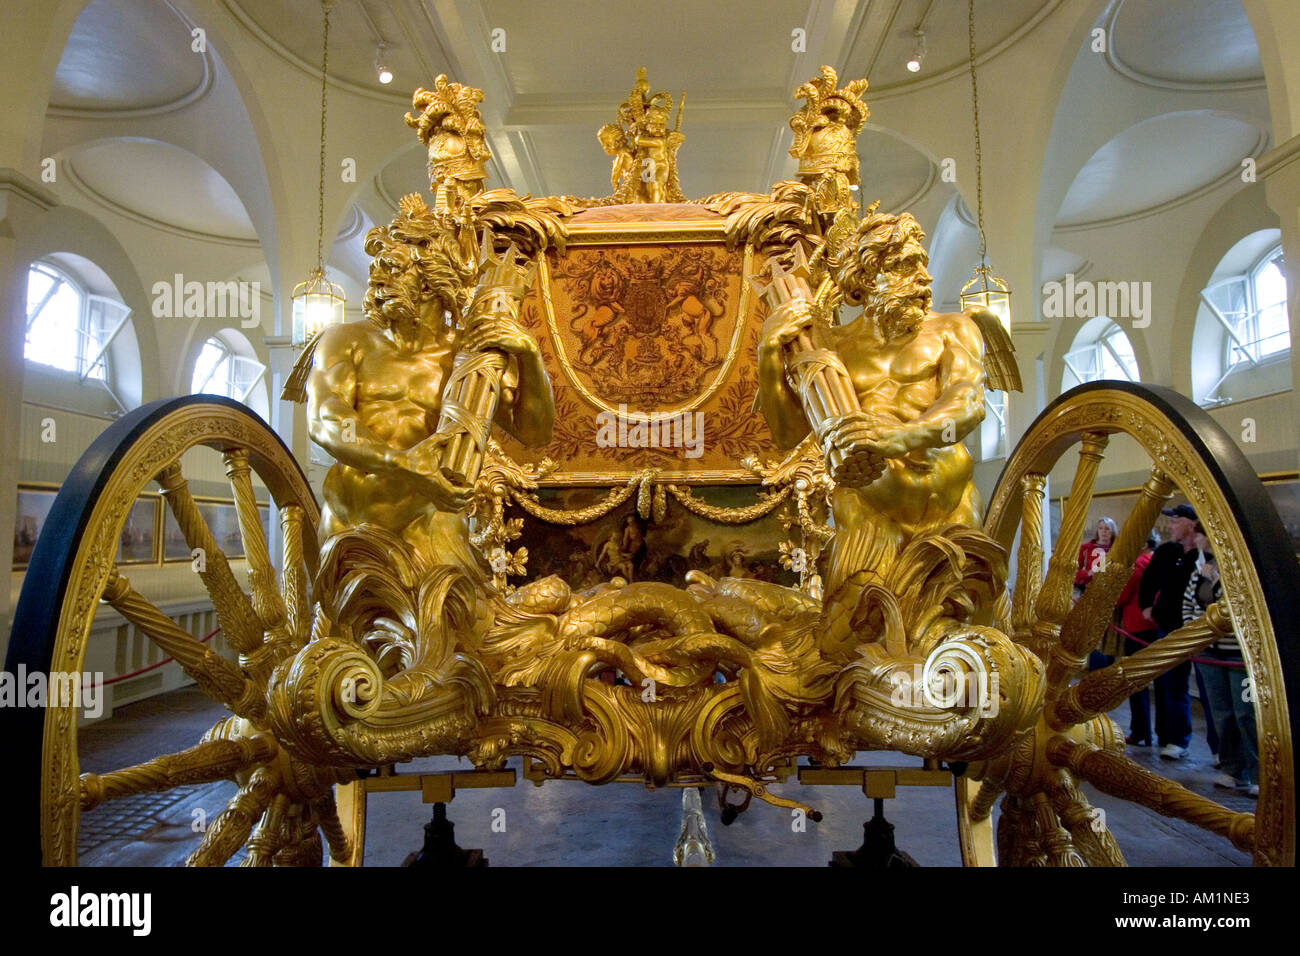 The Coronation Gold State coach in the Royal Mews London which was built for king George III in 1762 Stock Photo